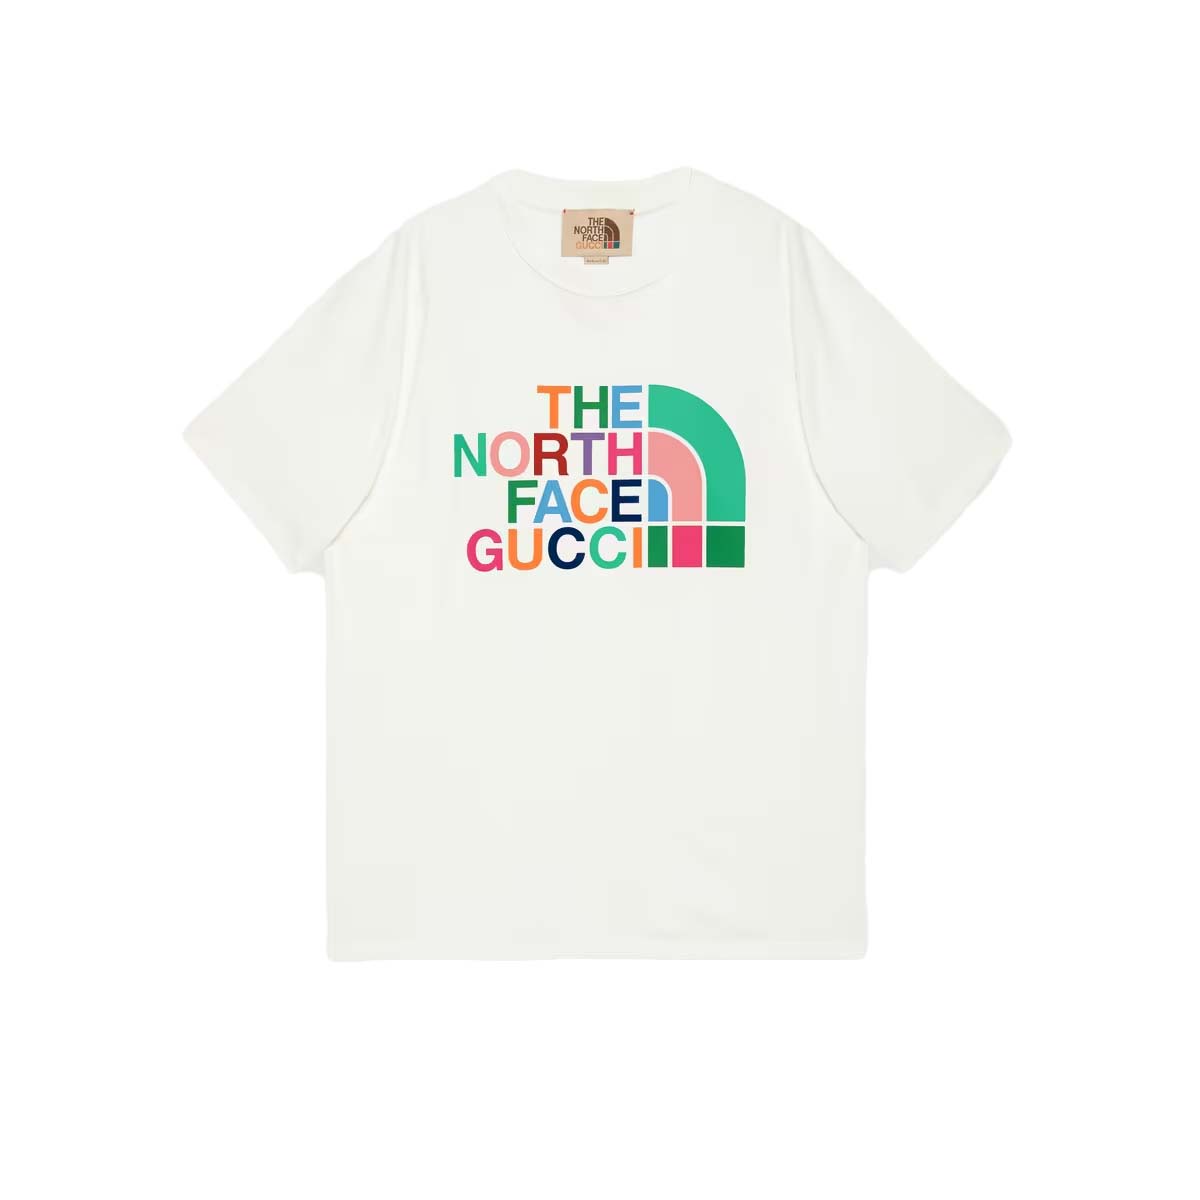 Gucci x The North Face T-shirt Ivory/Multicolor - FW22 Men's - US